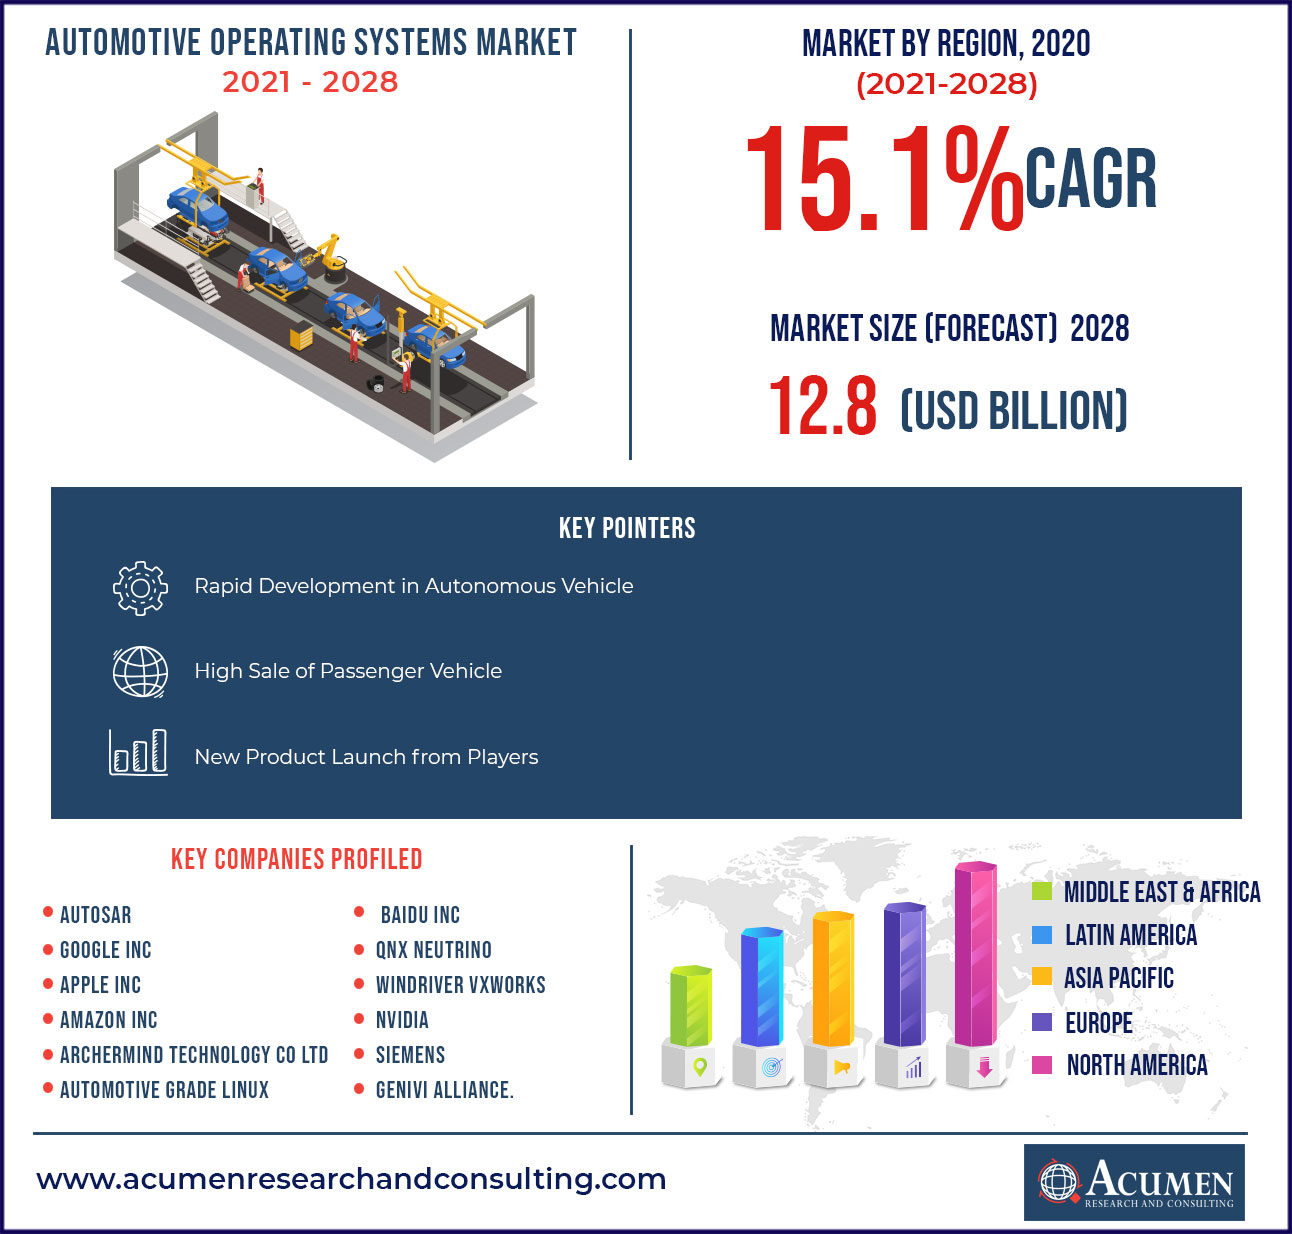 Automotive Operating Systems Market Size - US$ 4.2 Bn in 2020 | CAGR of 15.1%